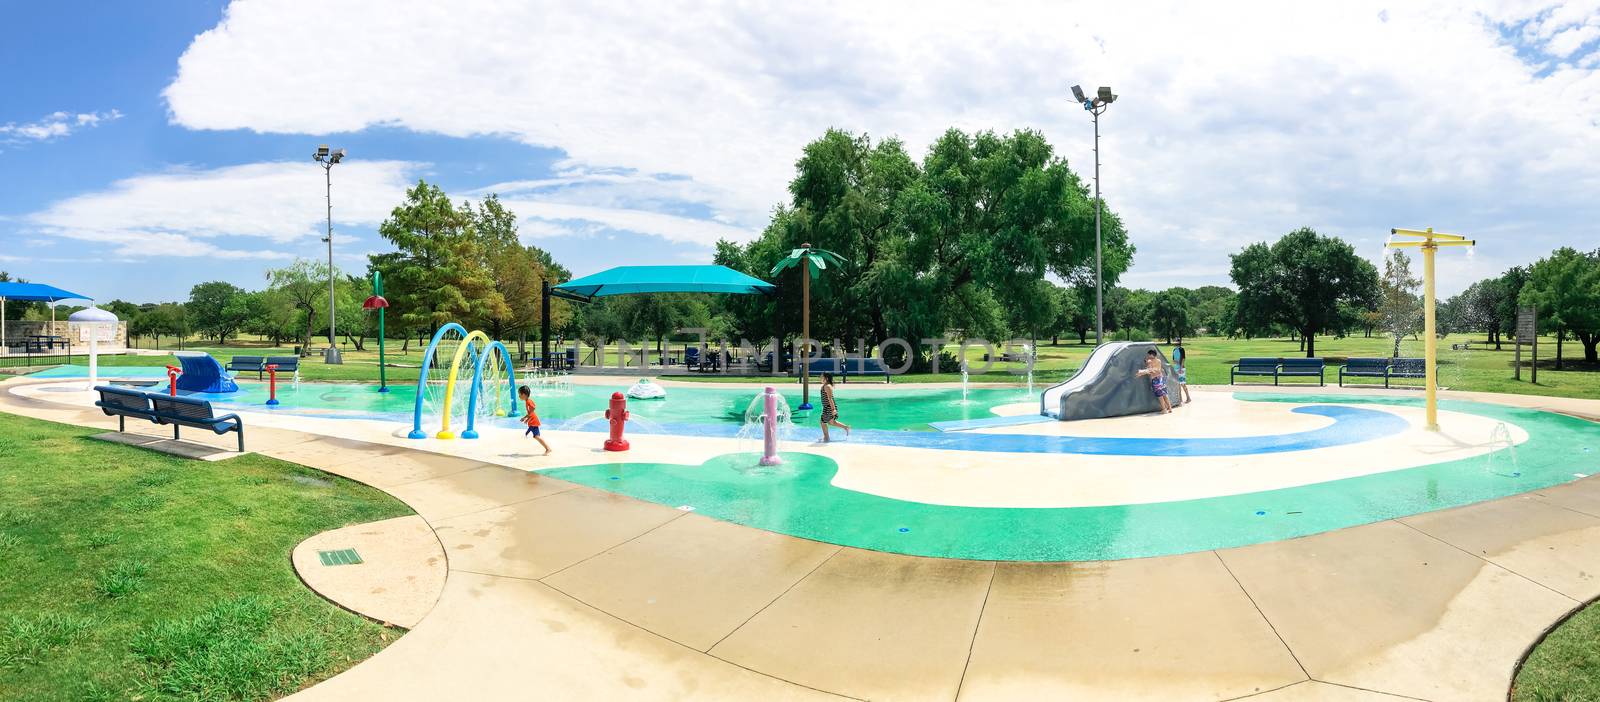 Panorama view rear view Asian toddler boy playing at splash park near Dallas, Texas, America. Colorful recreation site with splashing water fountains for kids summertime activities